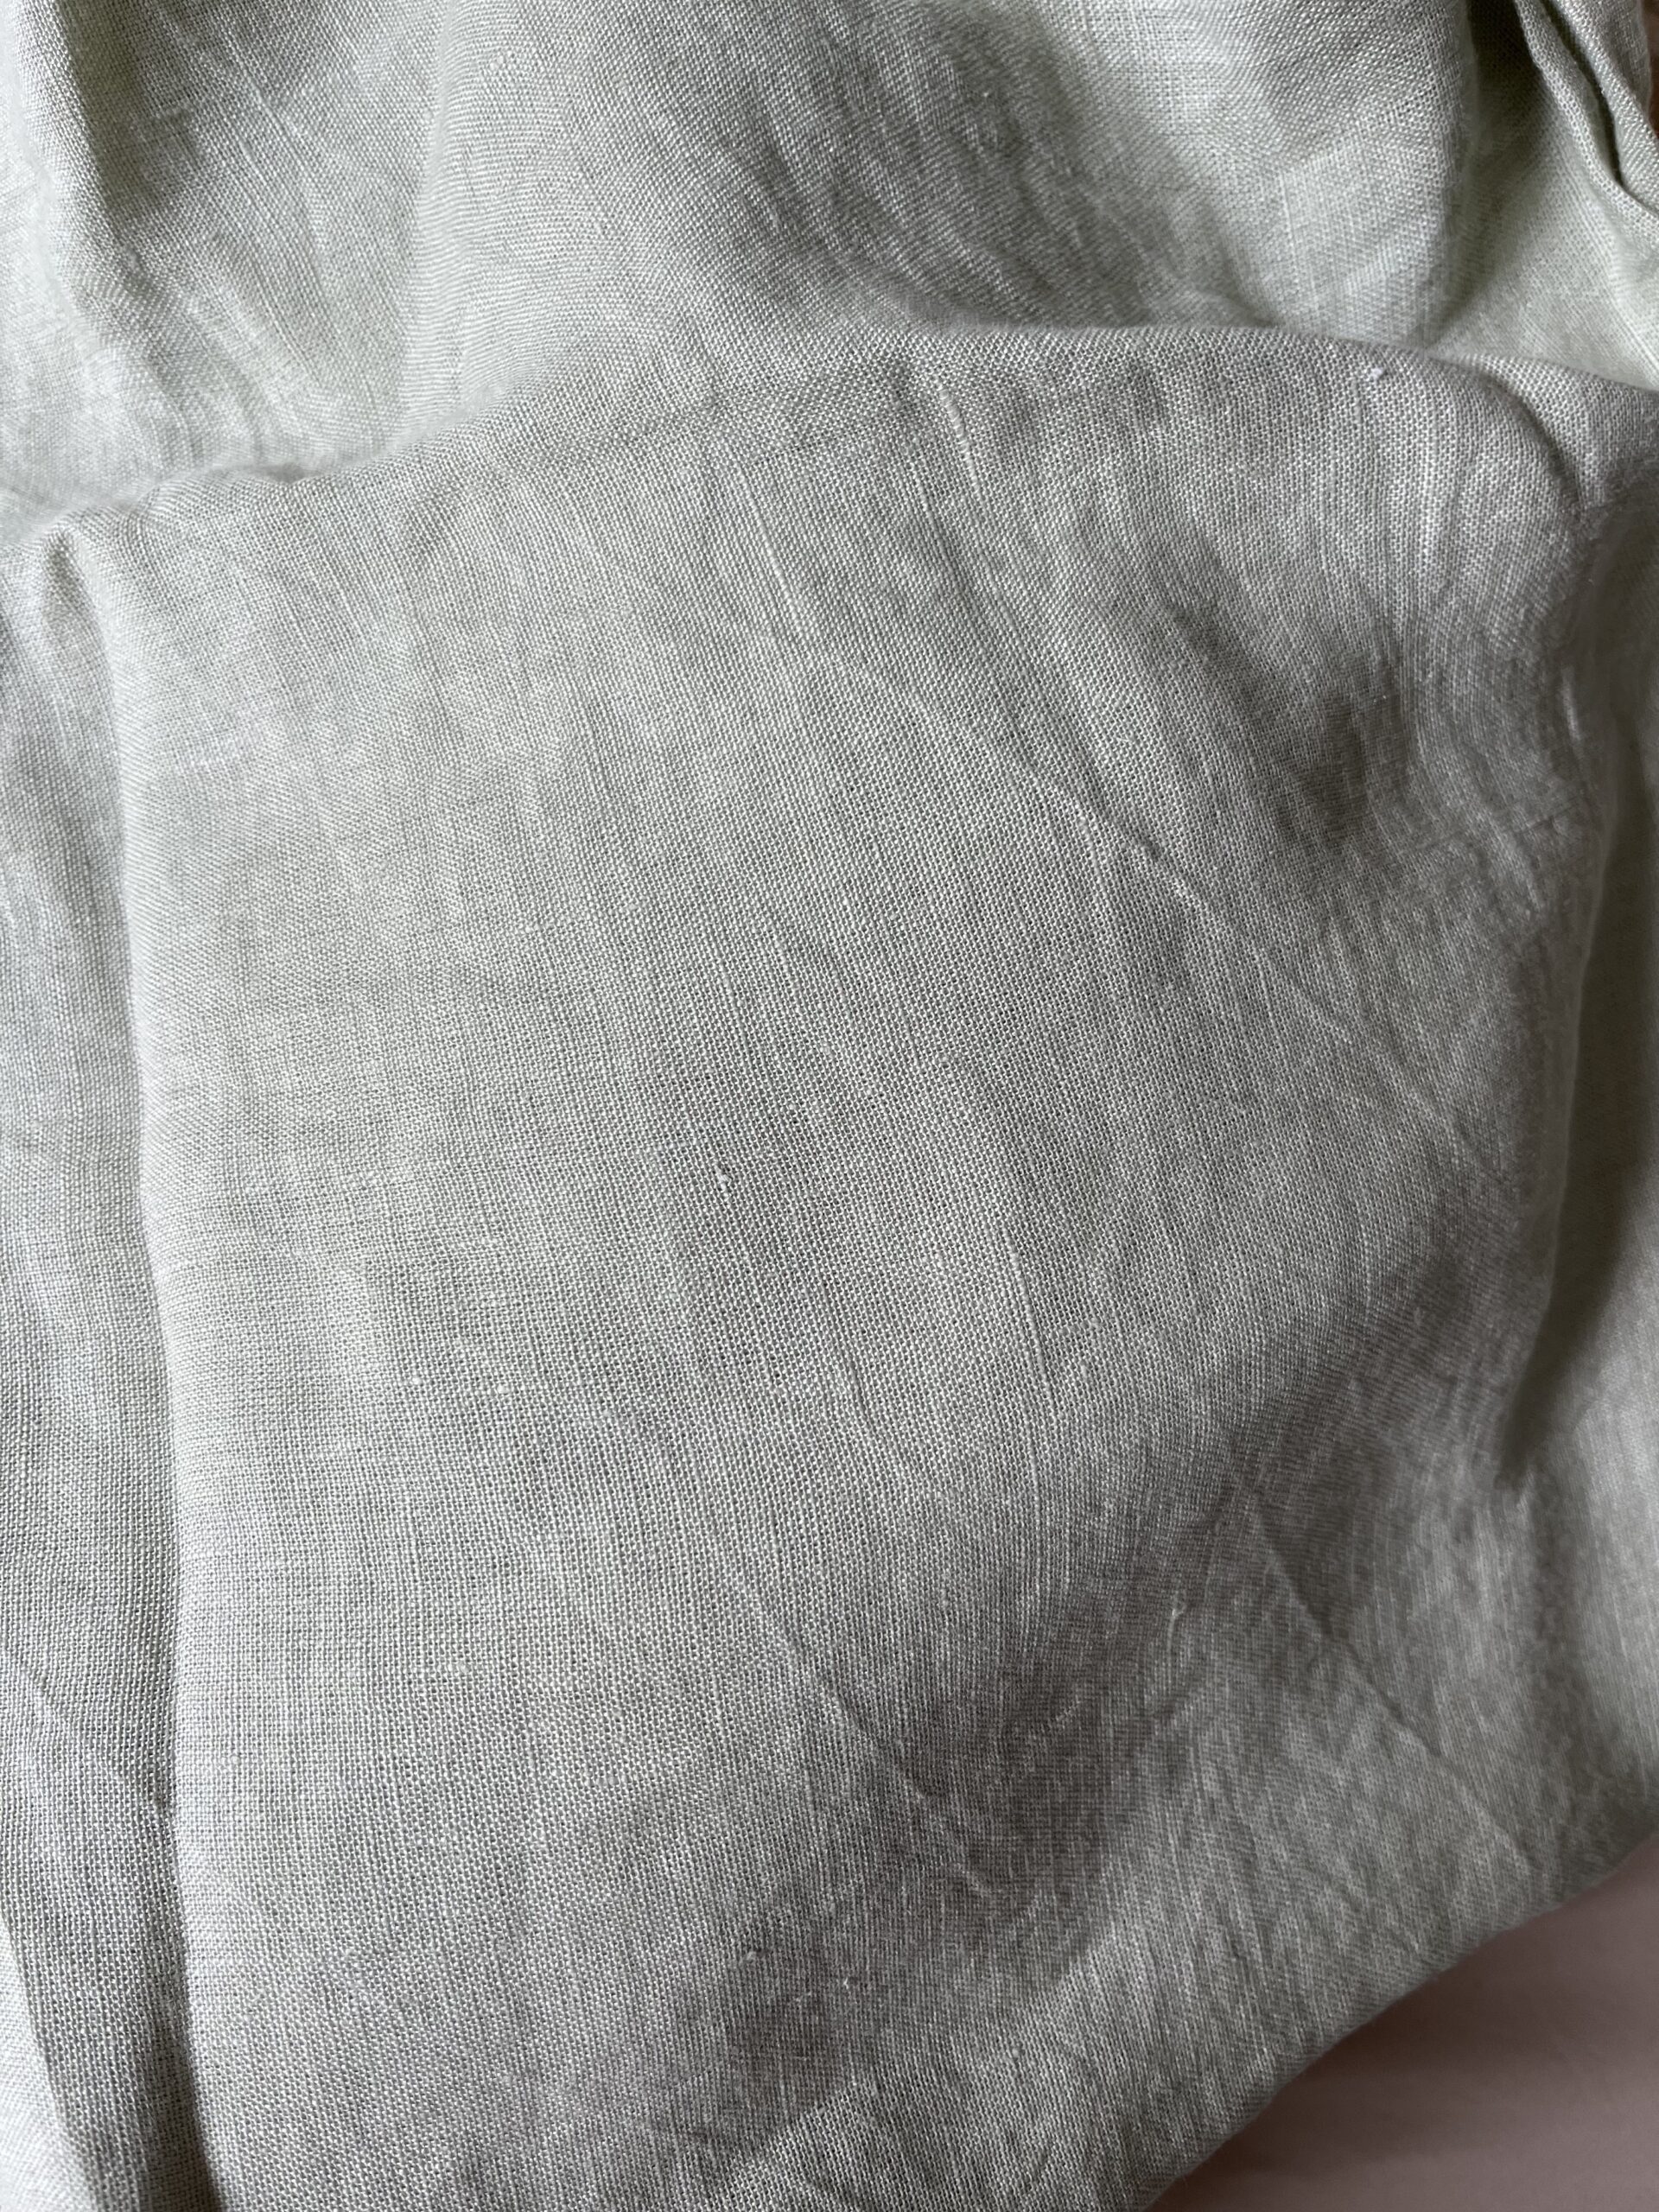 Close-up of a crumpled piece of light gray fabric with visible texture and fine wrinkles.